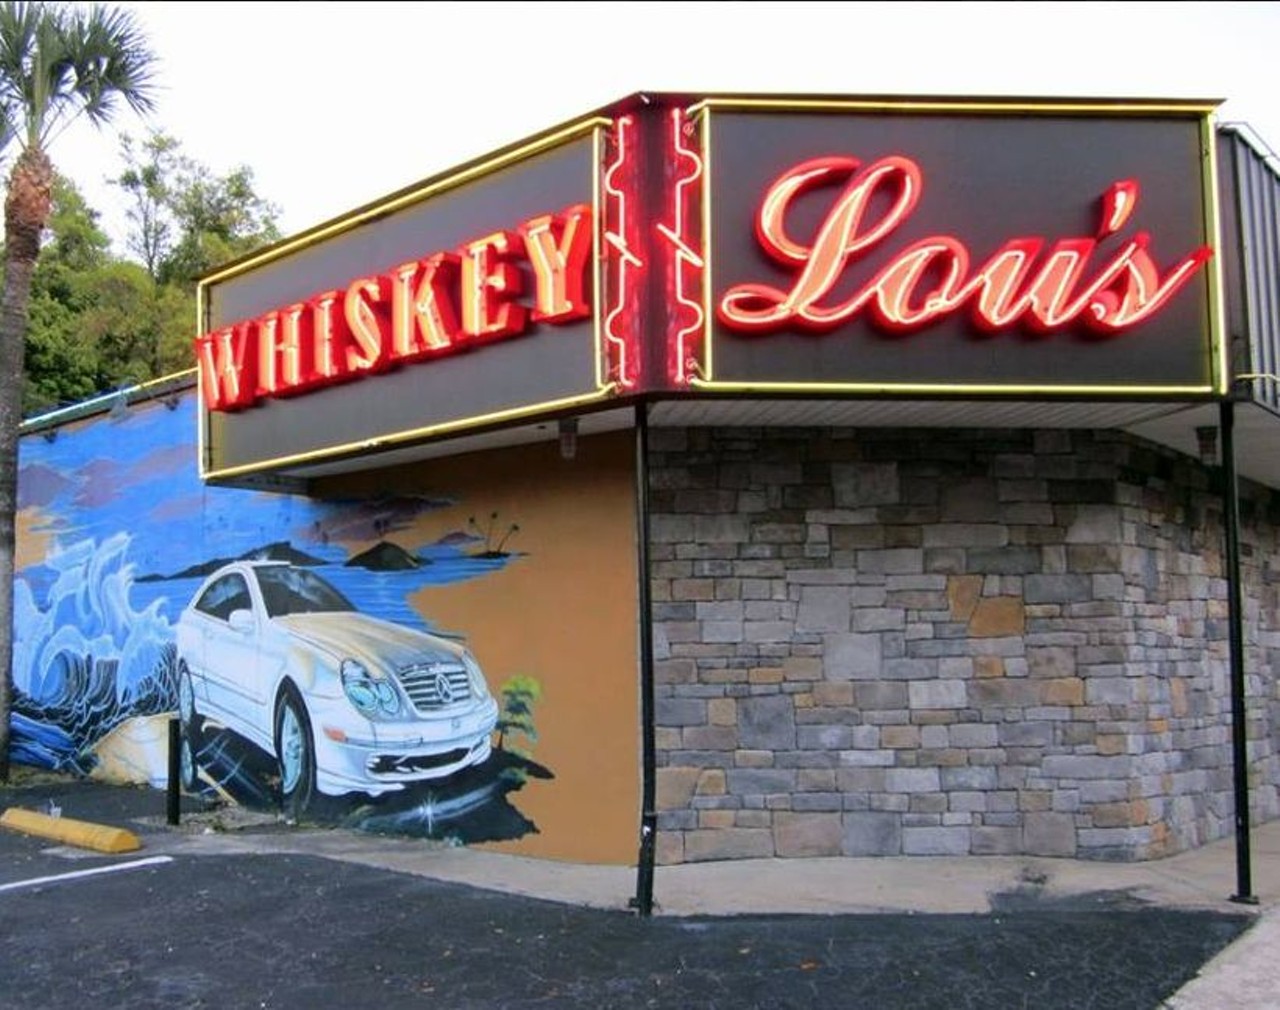 Whiskey Lou&#146;s Lounge 
121 N. Bumby Ave., 407-896-2593 
An Orlando Classic, visit Whiskey Lou&#146;s Lounge for the dive-bar experience complete with a jukebox, pool table, and strong drinks starting at 9 a.m. 
Photo via Whiskey Lou&#146;s Lounge/ Facebook